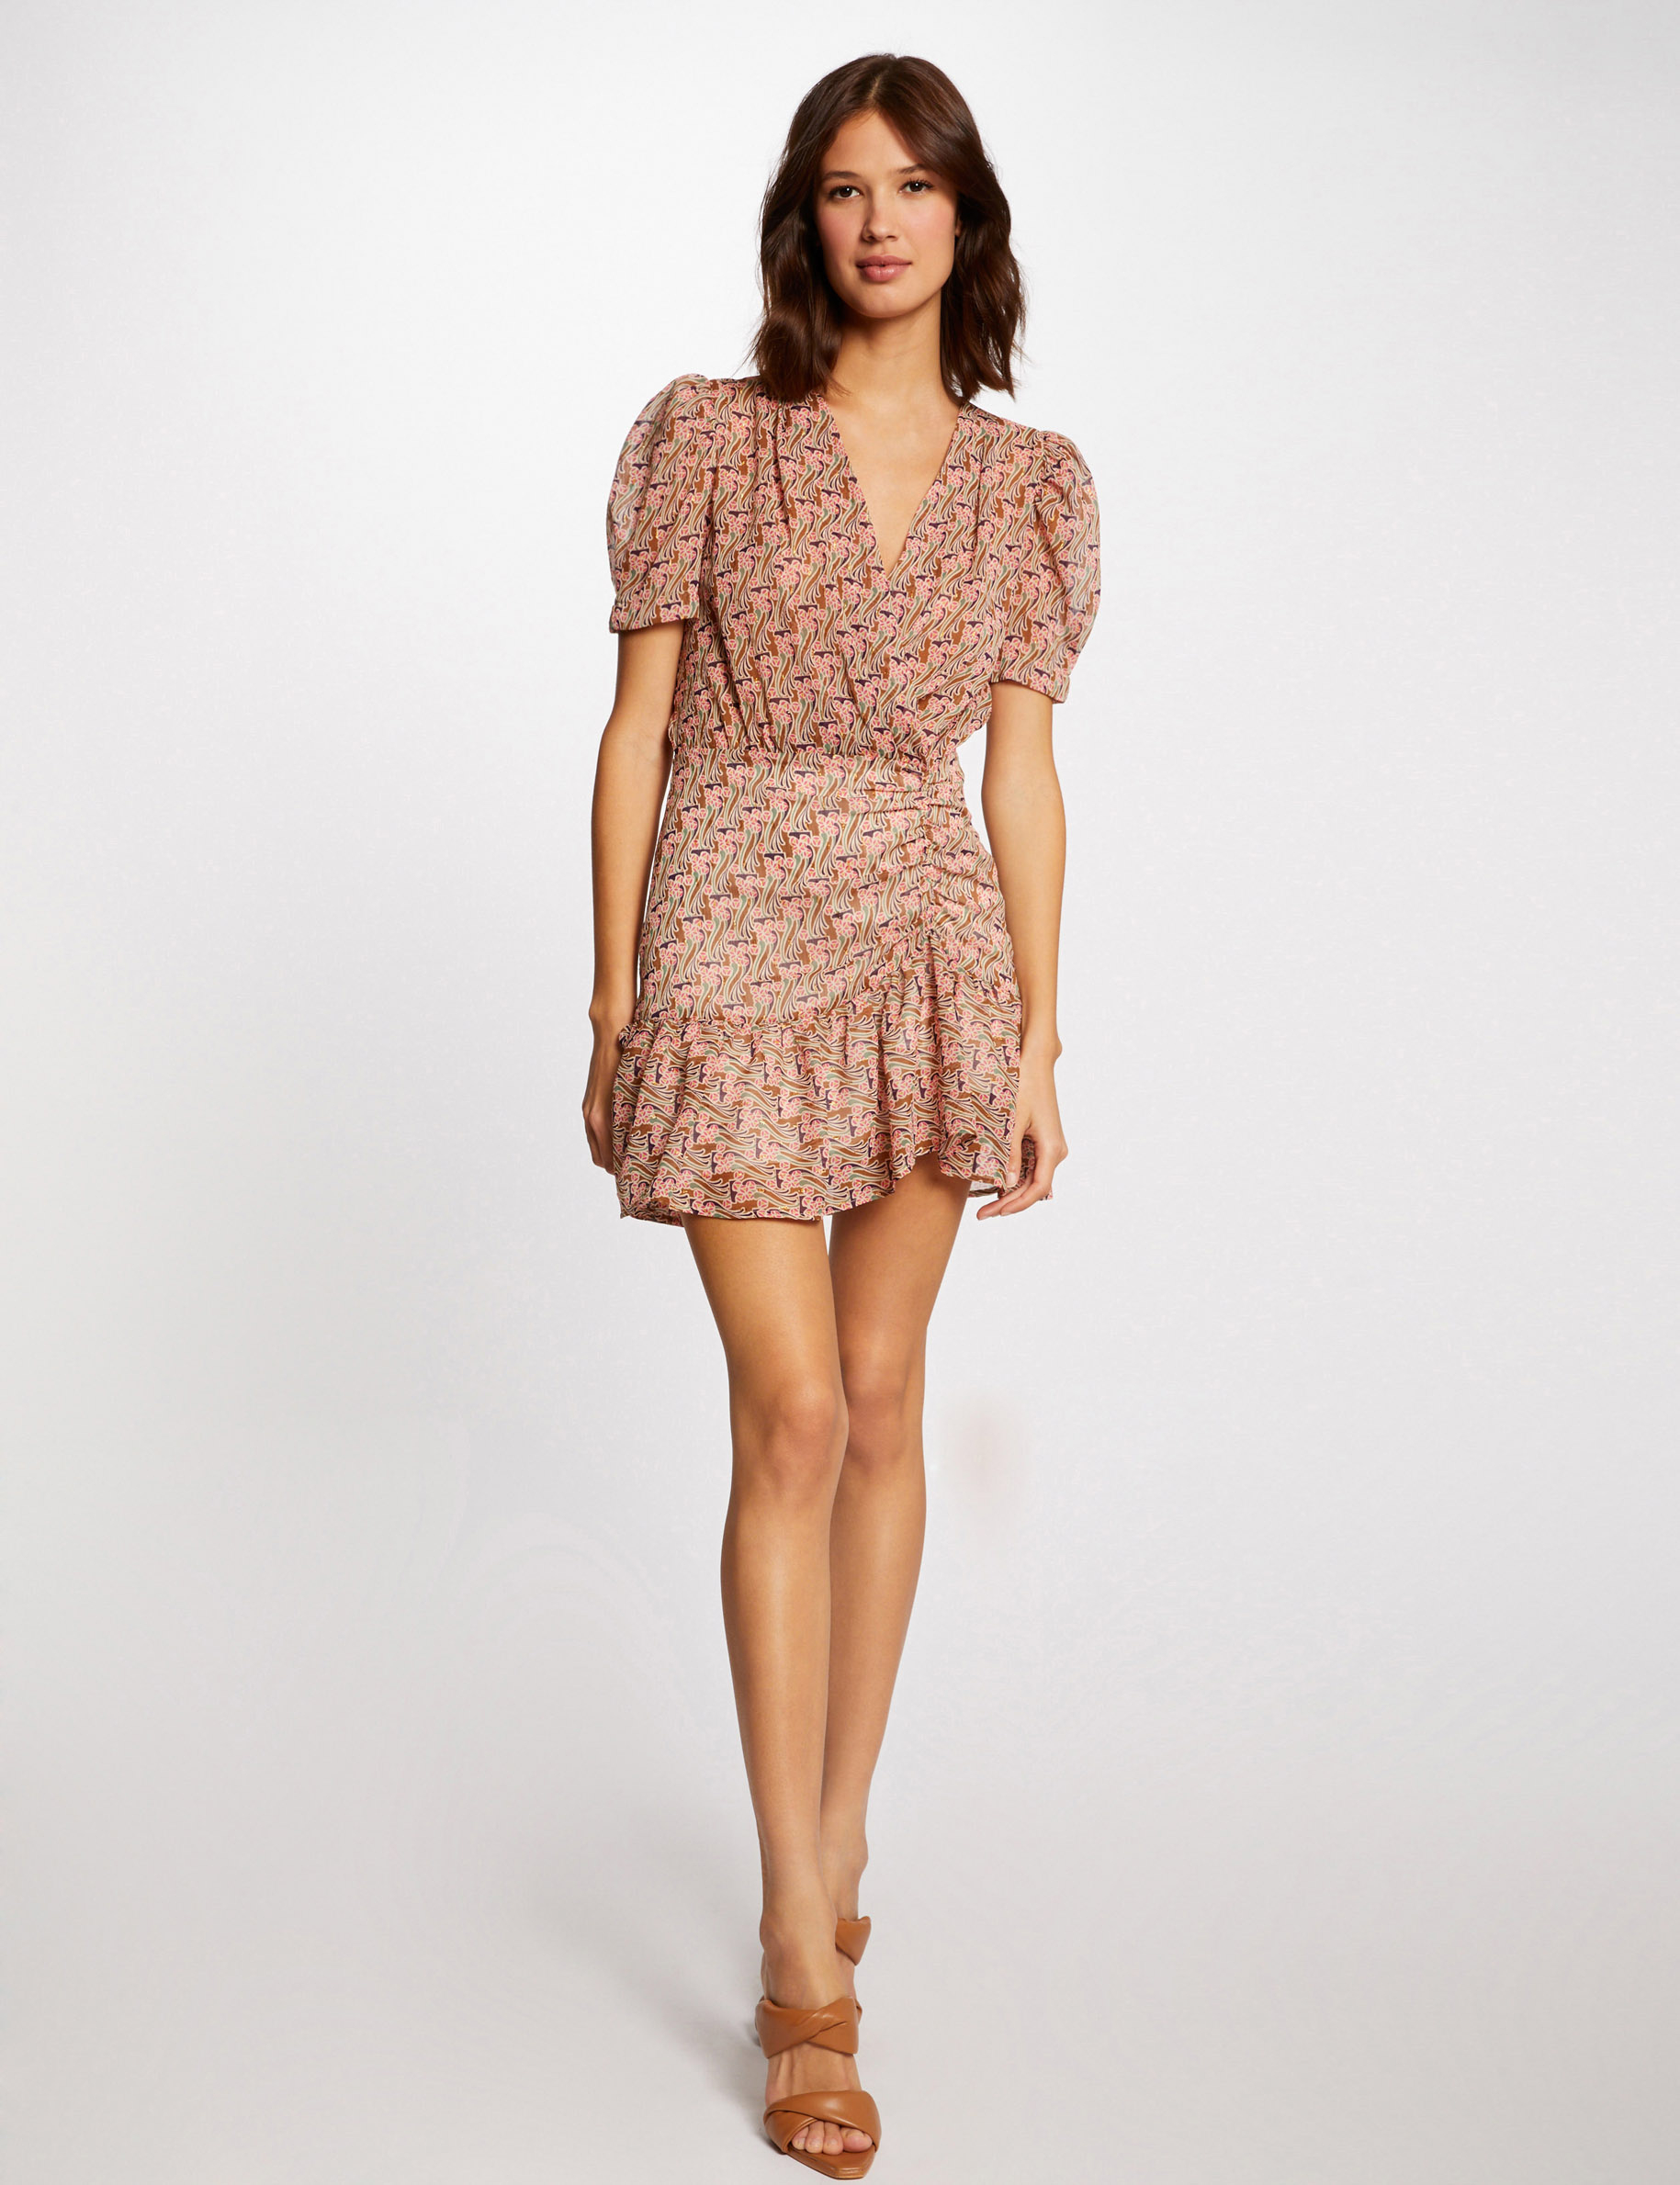 Fitted dress with vegetal print multico ladies'